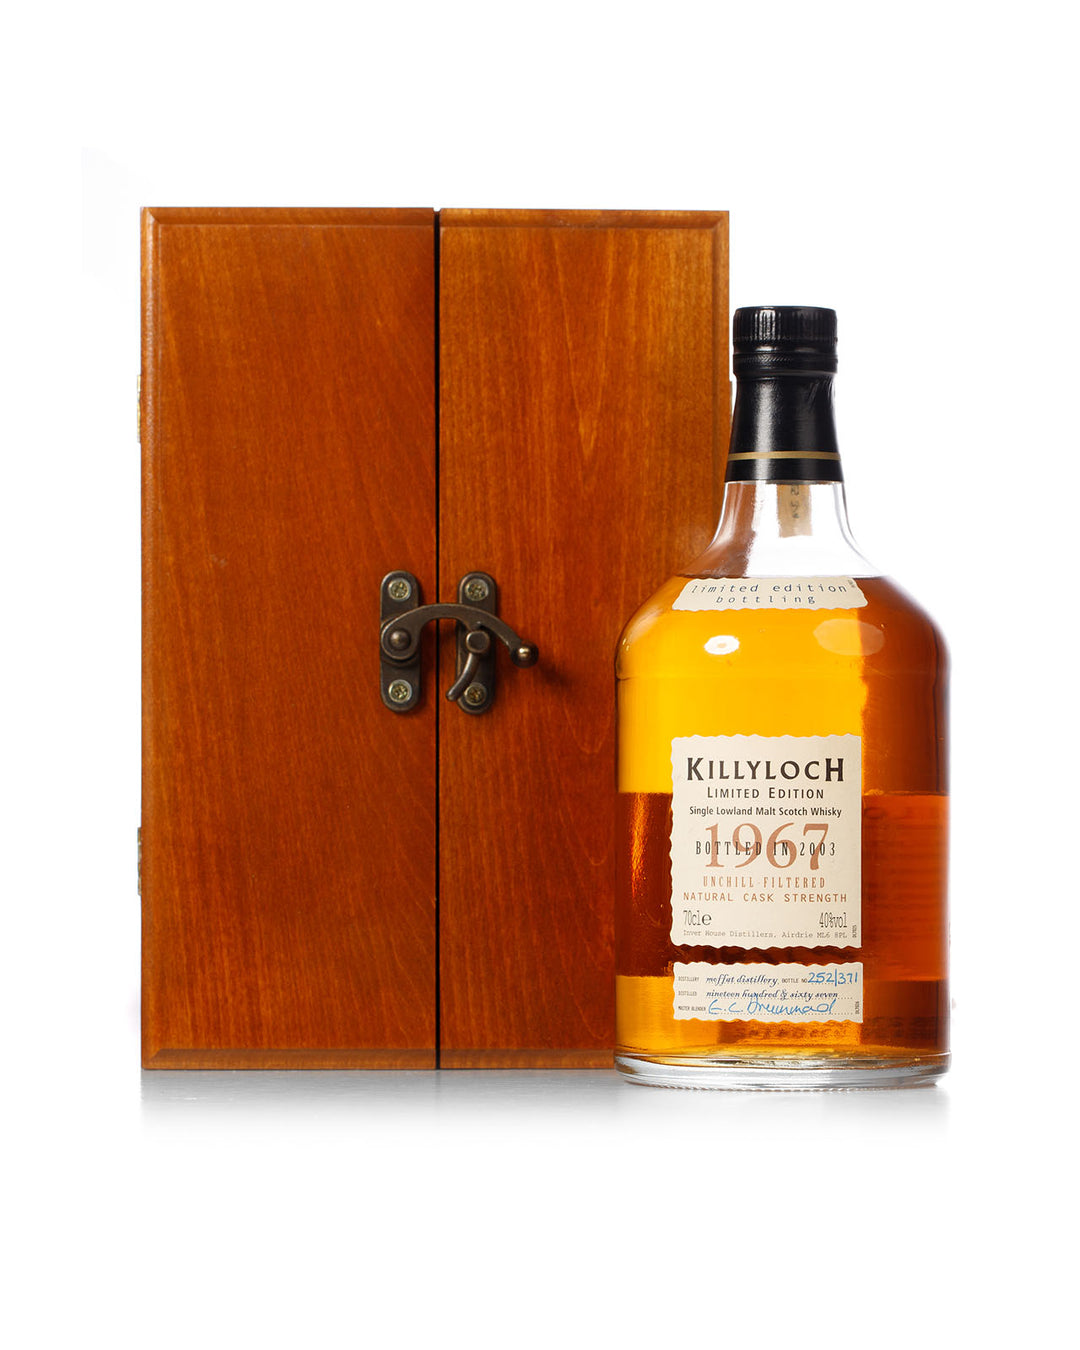 Killyloch 1967 36 Year Old Bottled 2003 With Original Wood Box